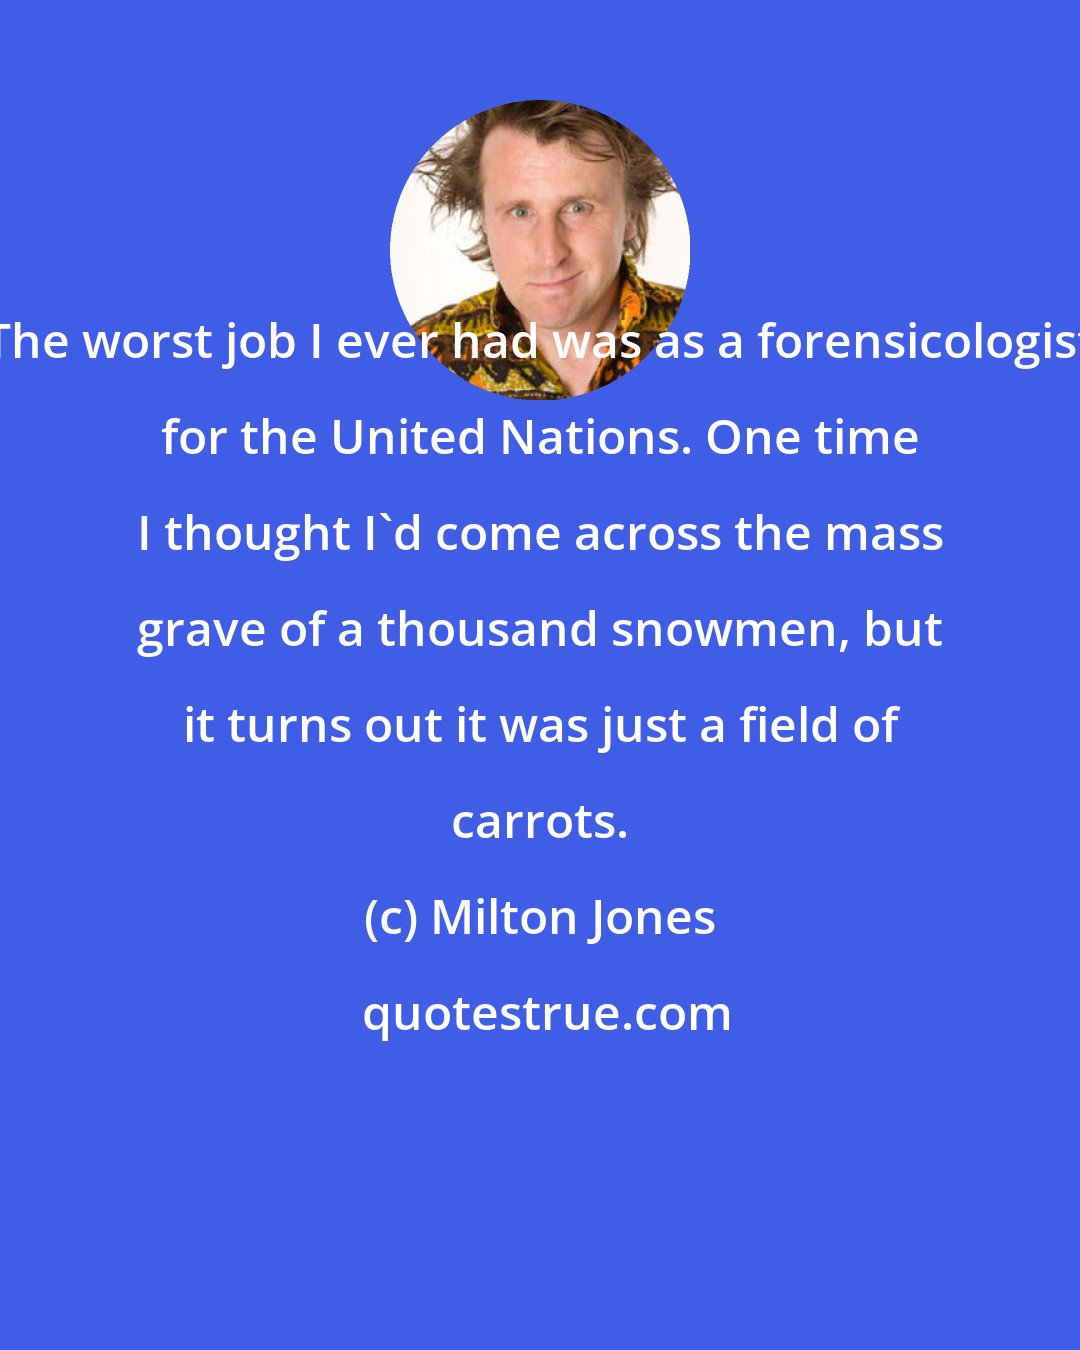 Milton Jones: The worst job I ever had was as a forensicologist for the United Nations. One time I thought I'd come across the mass grave of a thousand snowmen, but it turns out it was just a field of carrots.